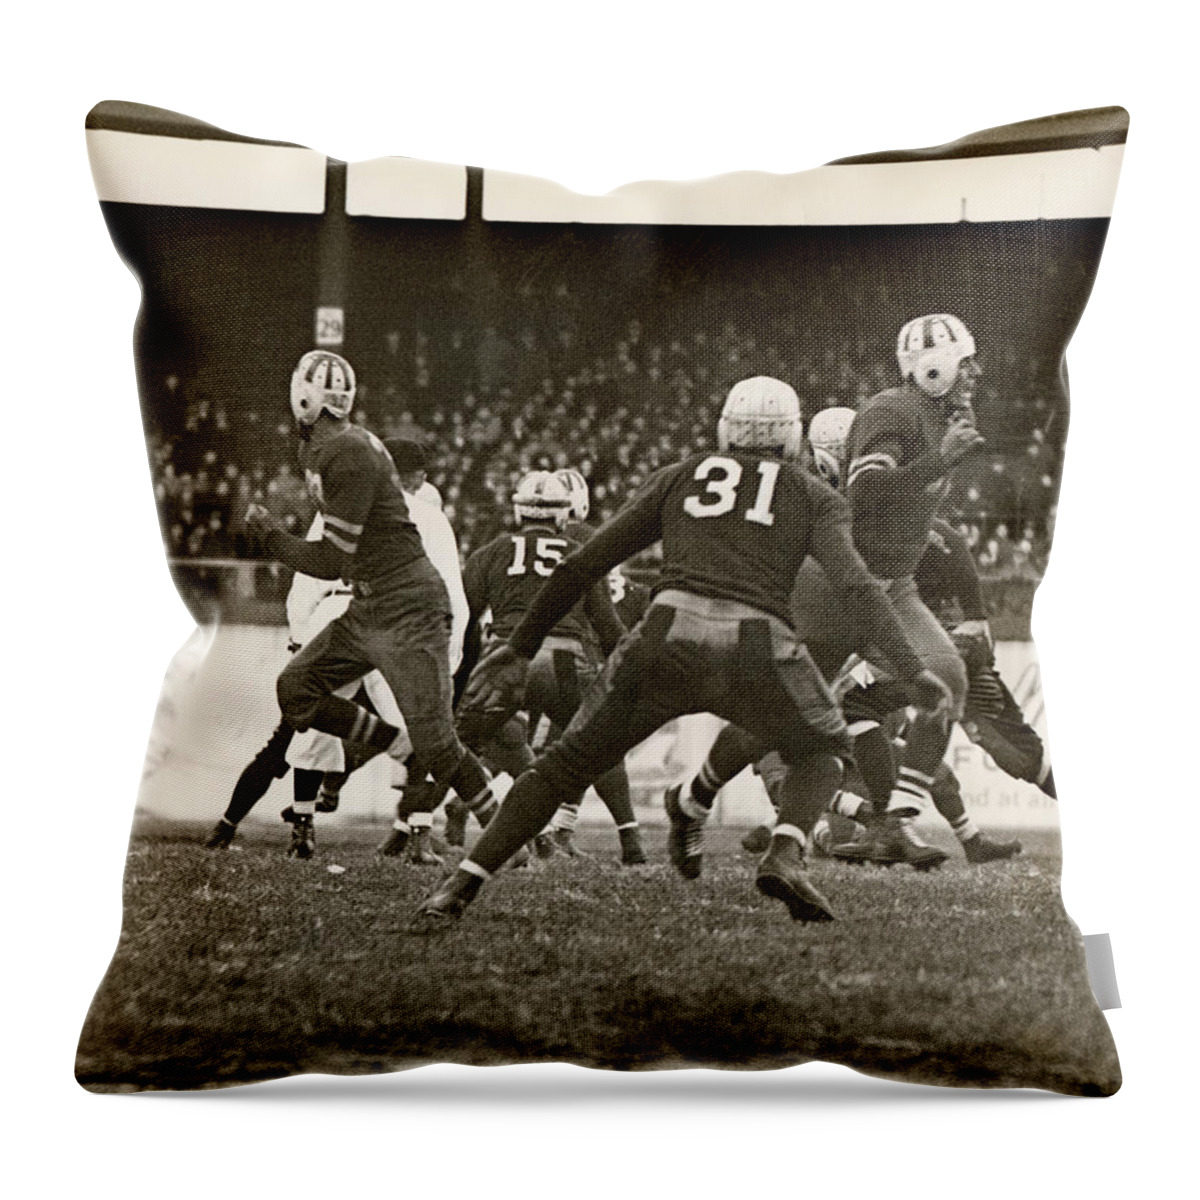 People Throw Pillow featuring the photograph Football Game In Progress by George Marks